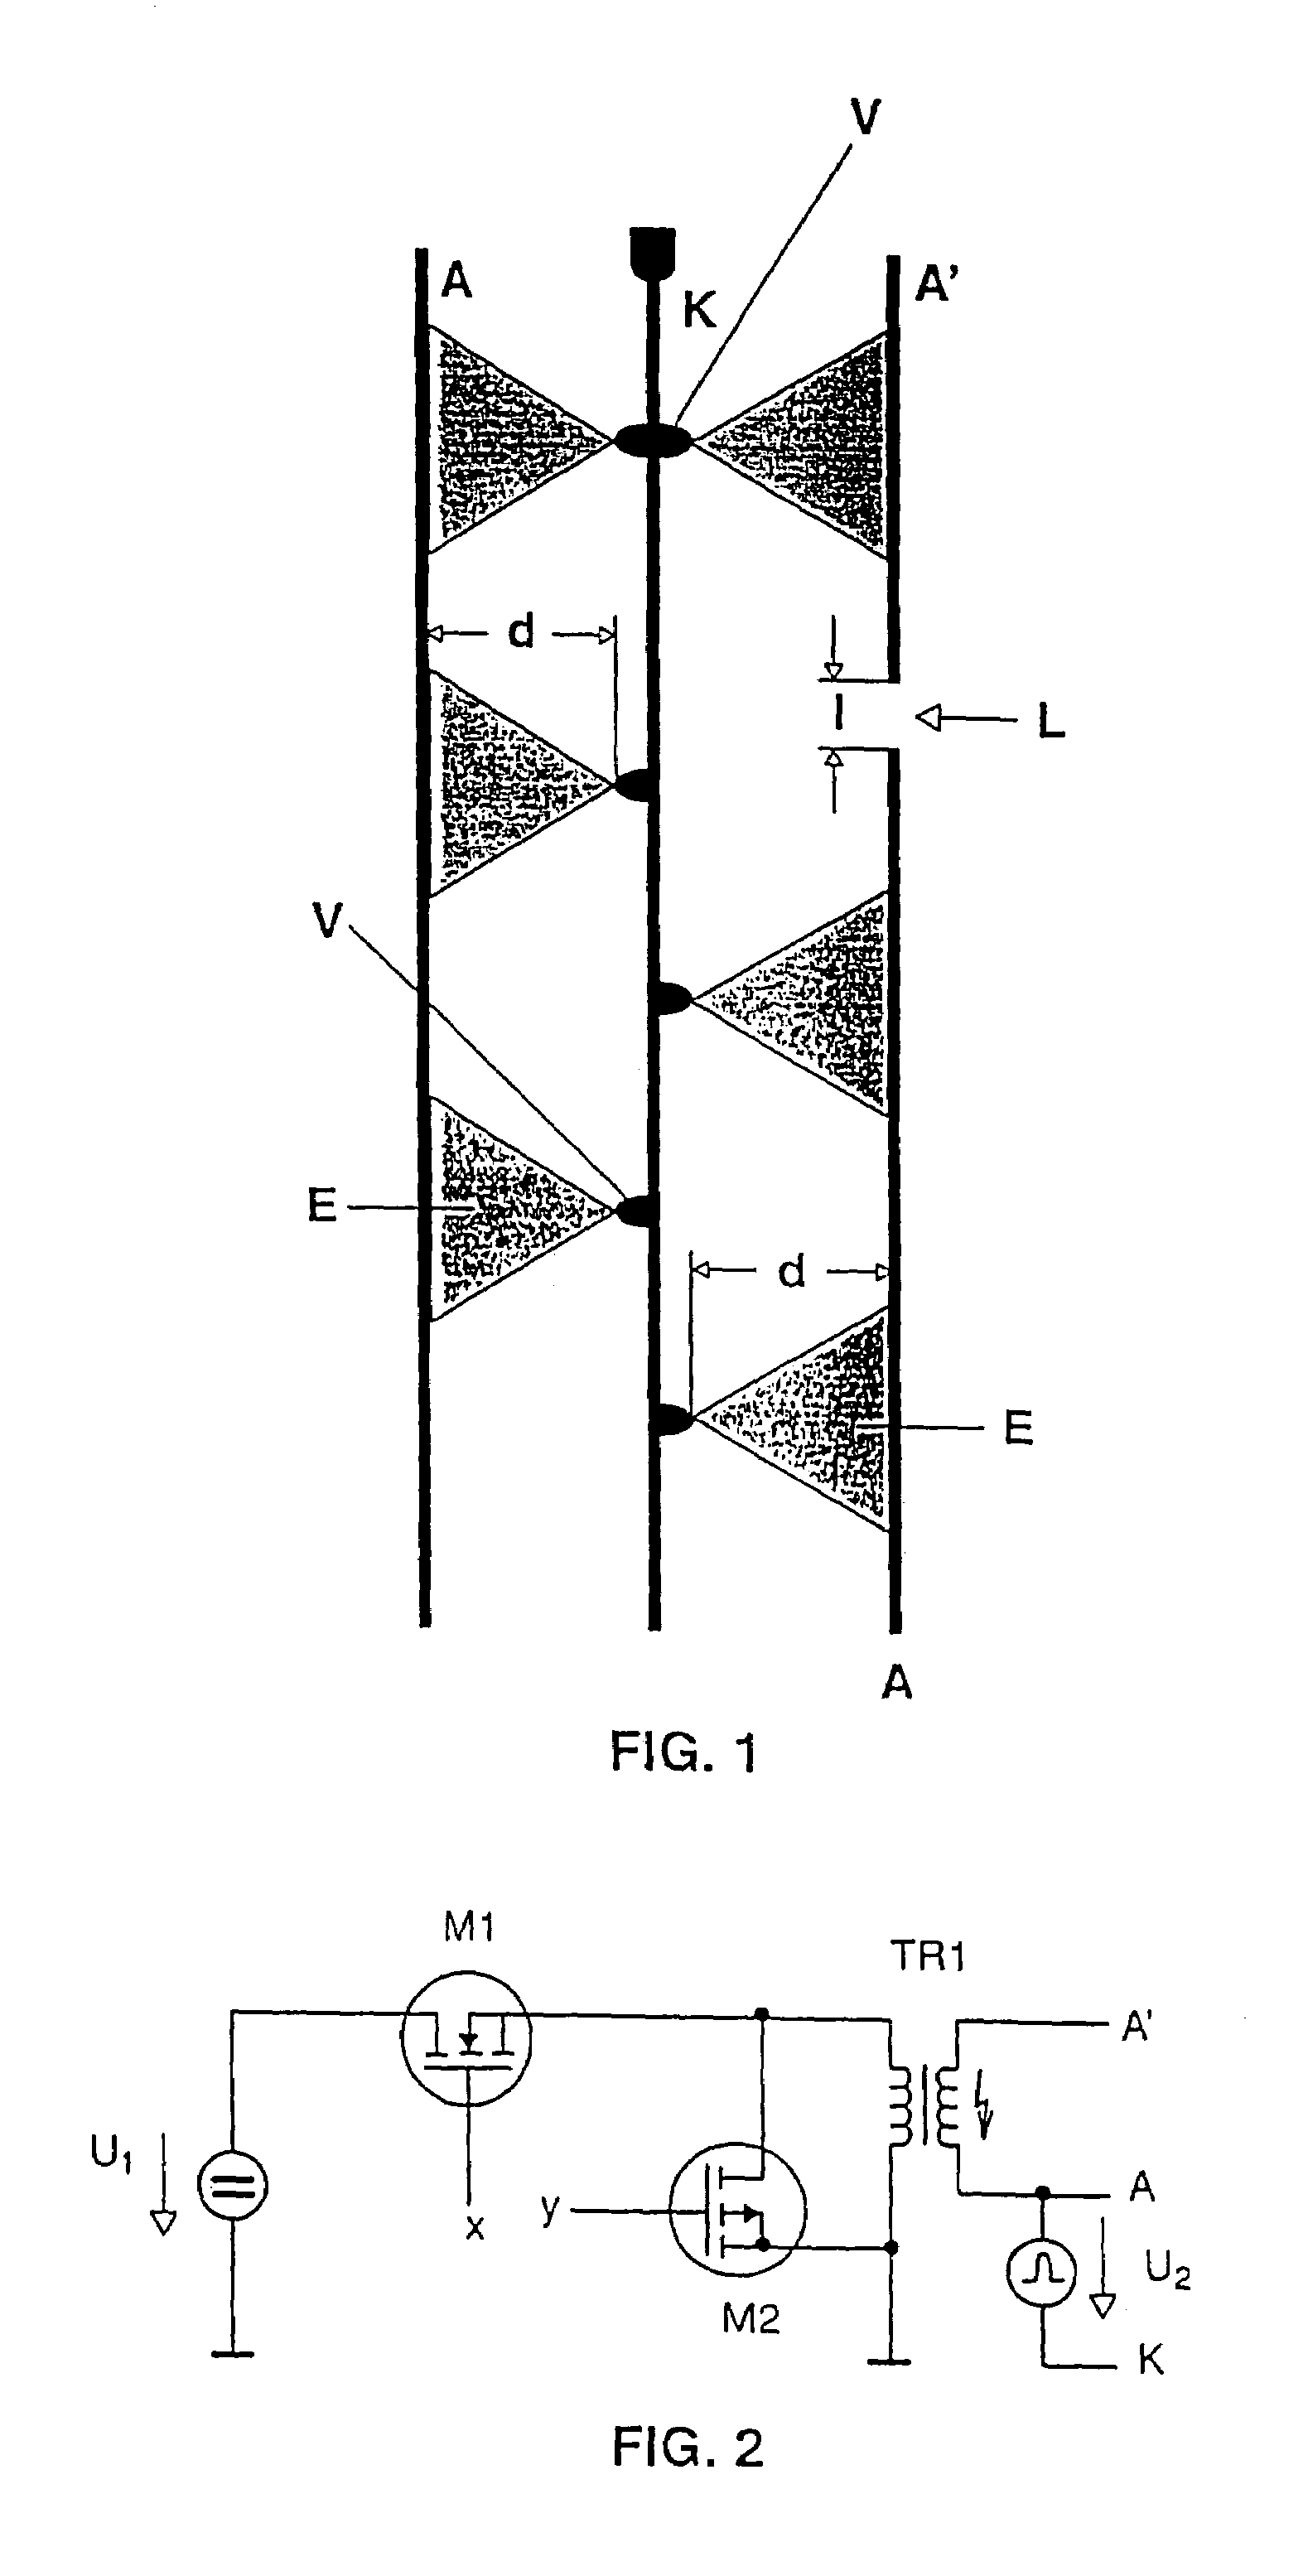 Dielectric barrier discharge lamp and method and circuit for igniting and operating said lamp